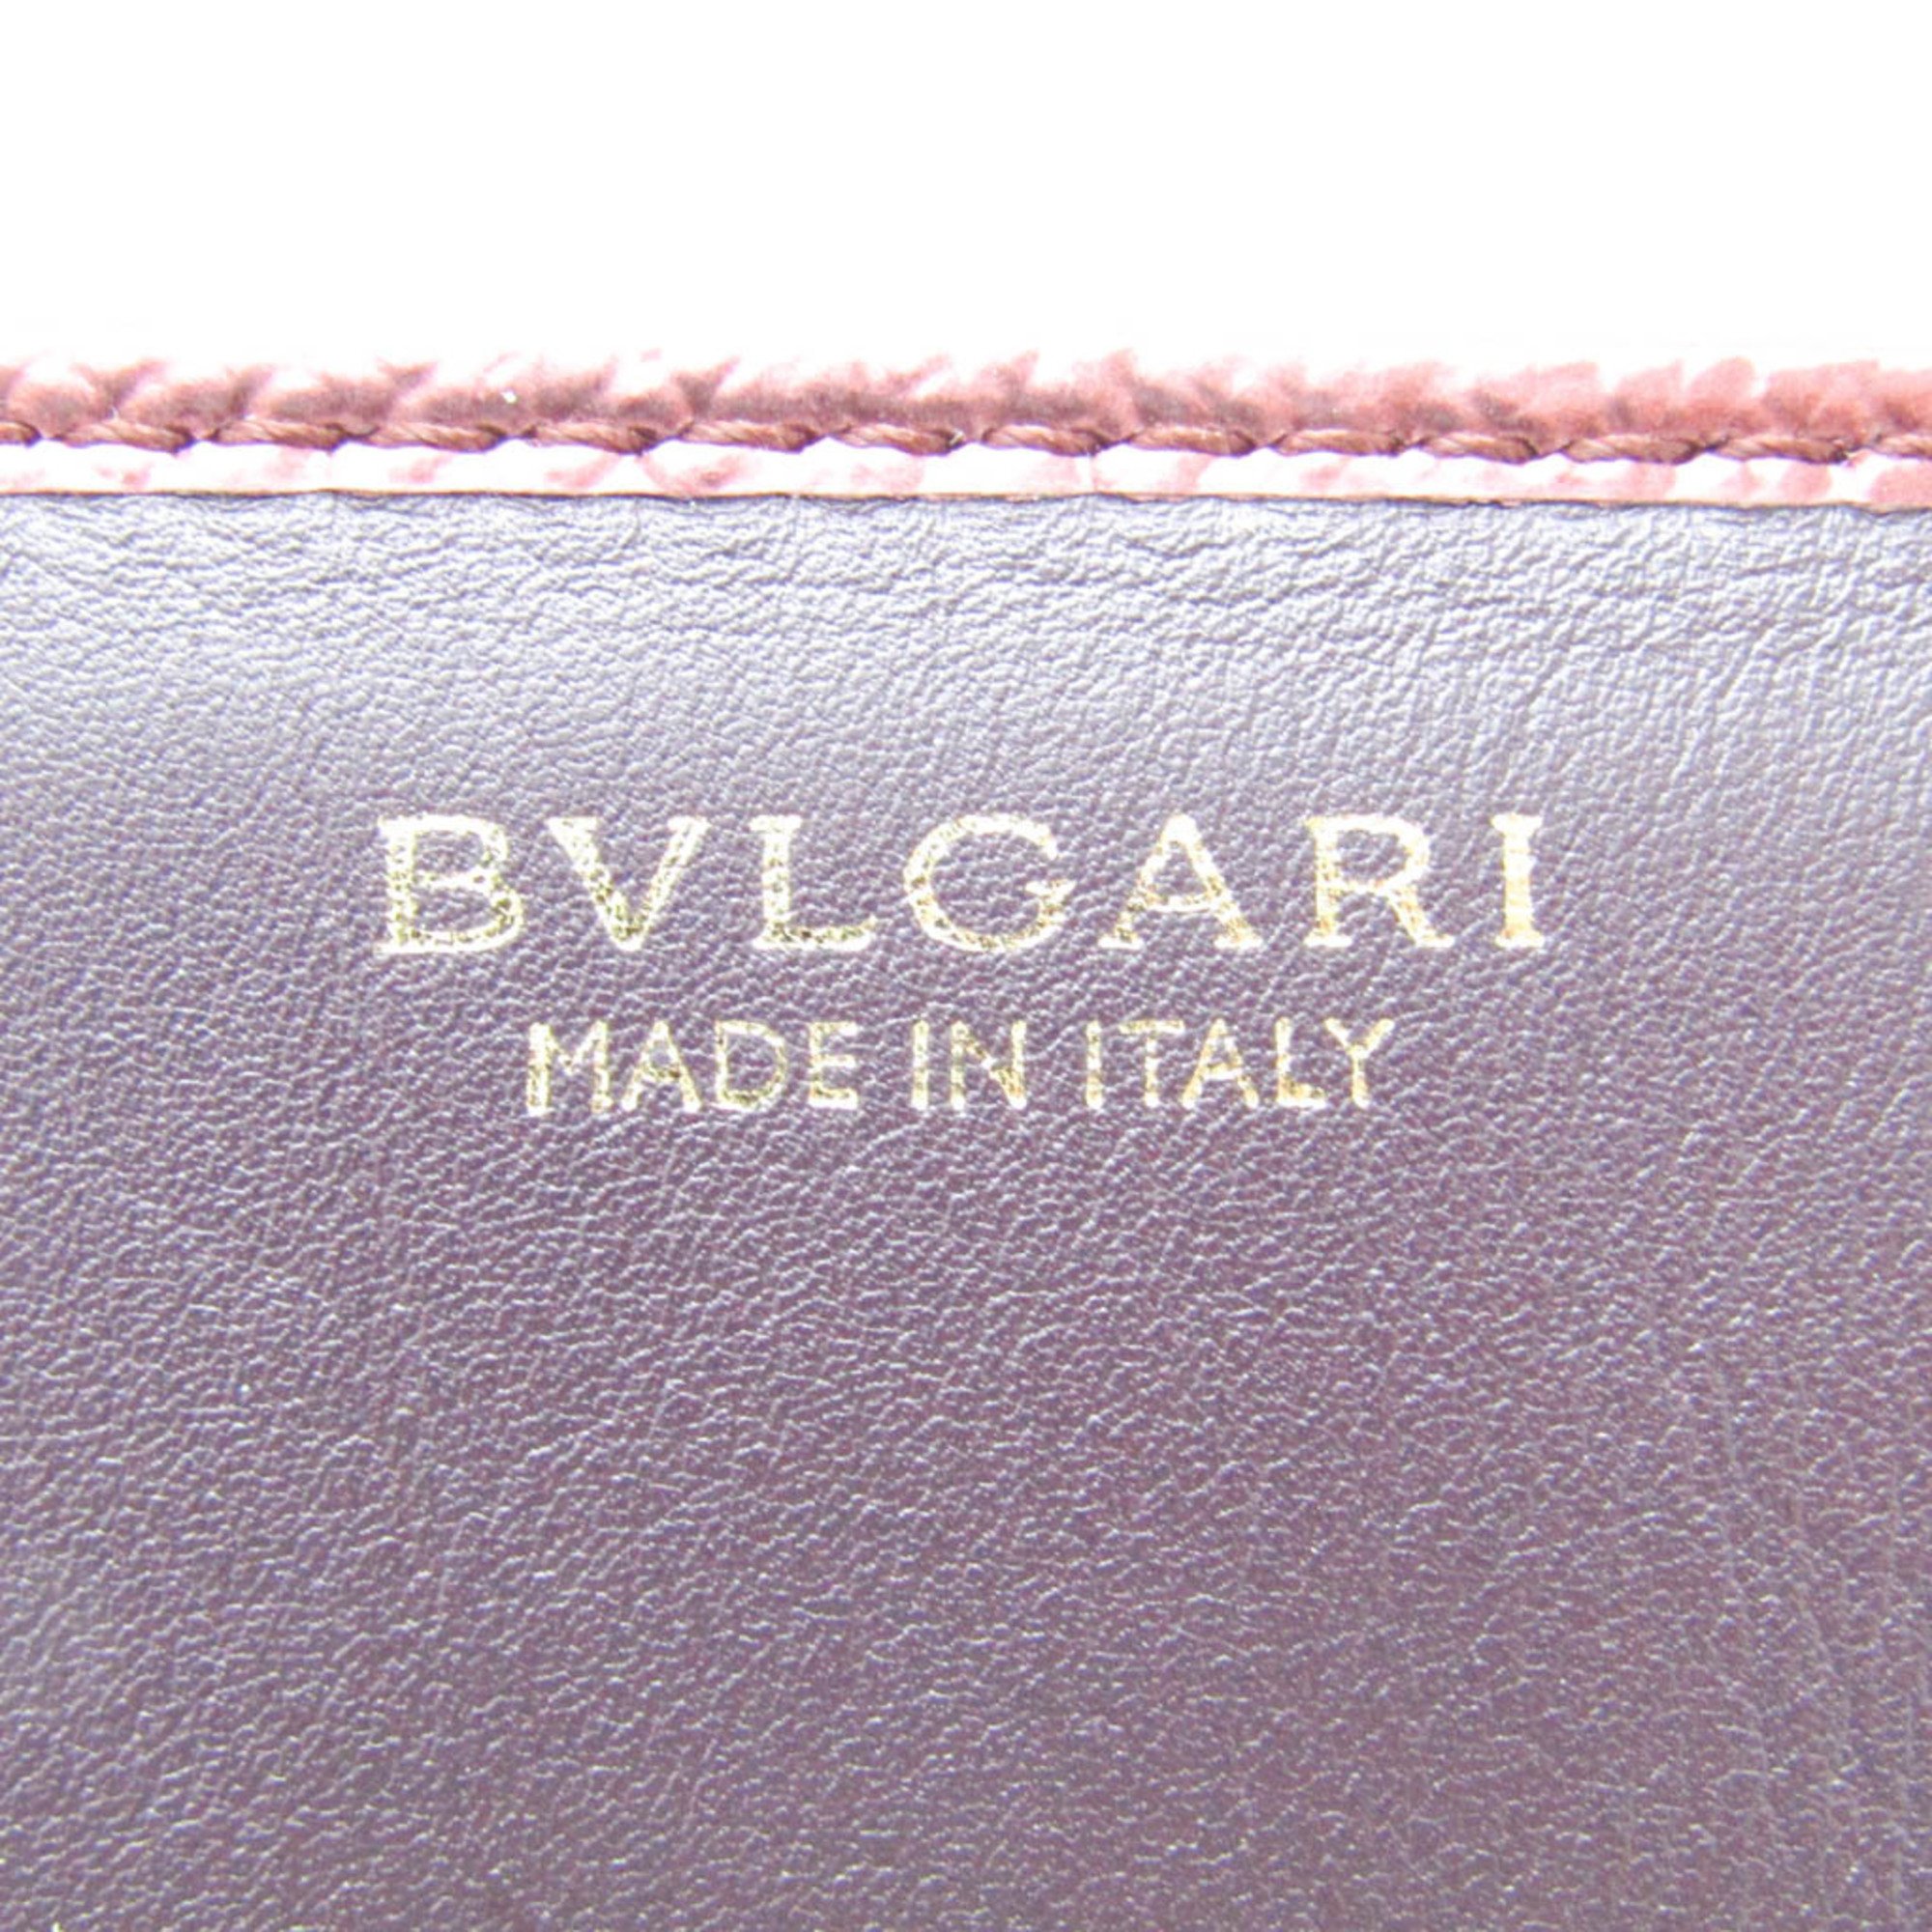 Bvlgari 287072 Leather Business Card Case Bordeaux,Metallic Red